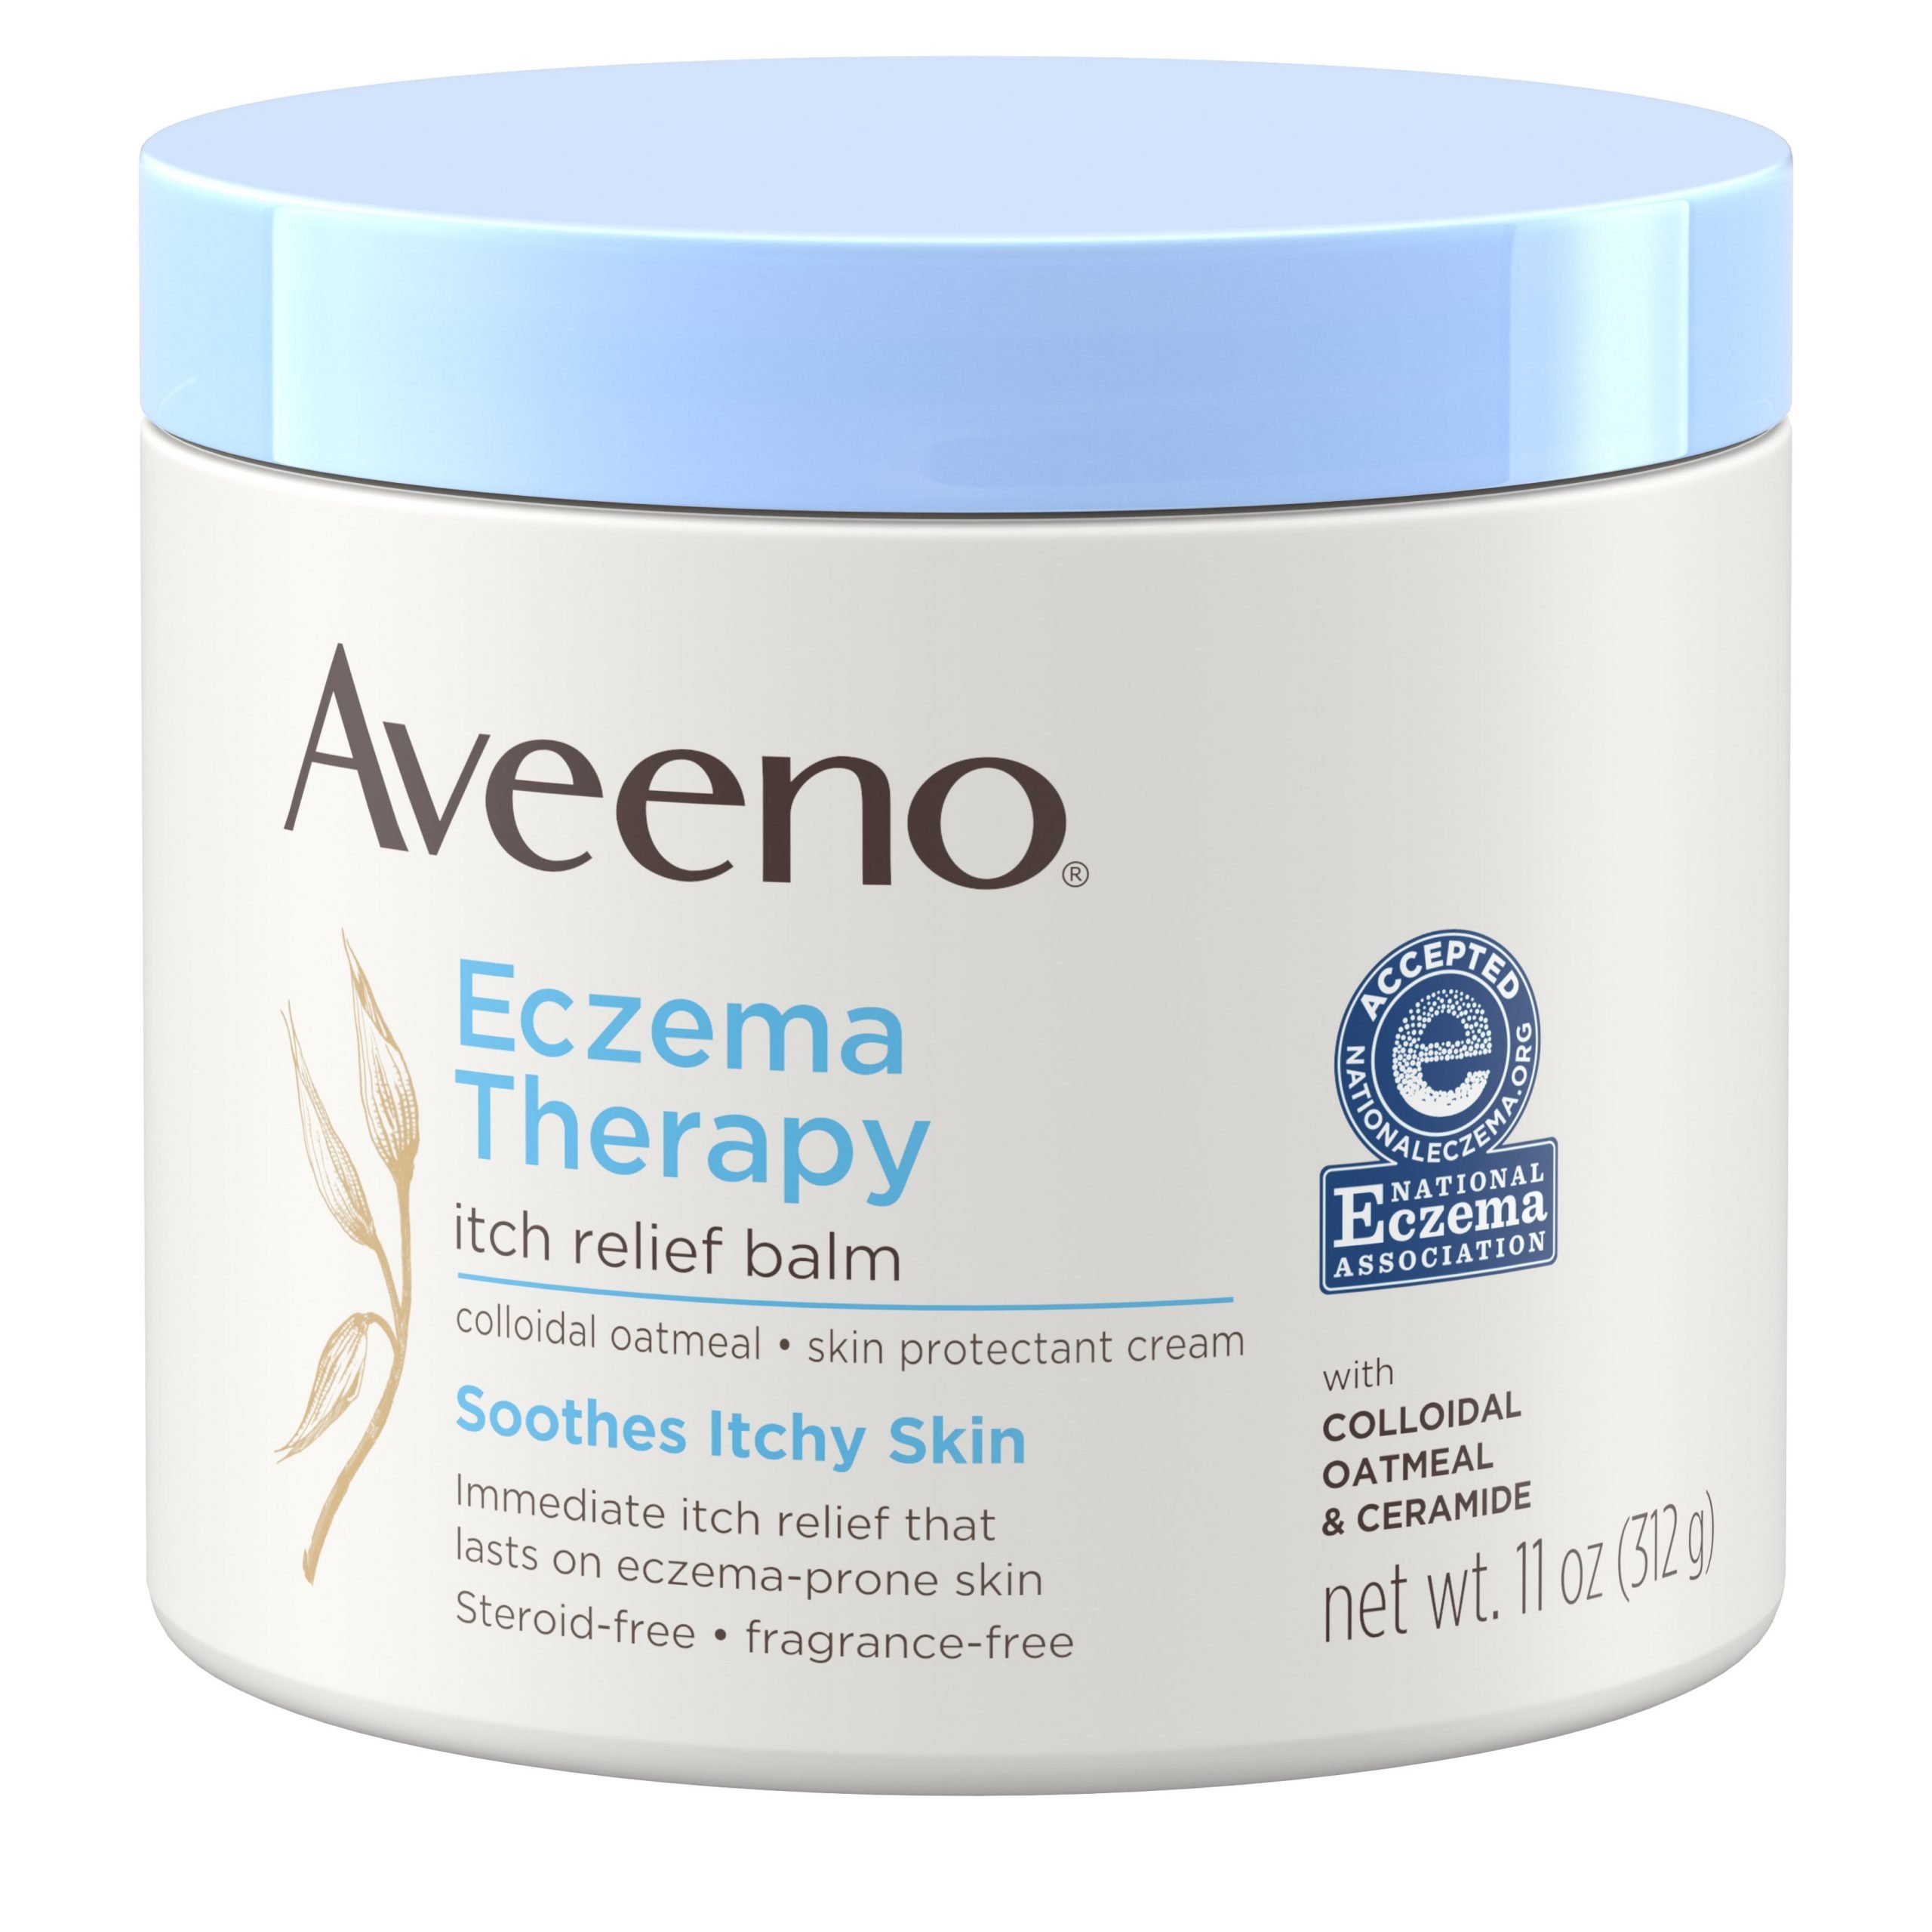 Aveeno Eczema Therapy Itch Relief Balm with Colloidal Oatmeal, 11 oz ...